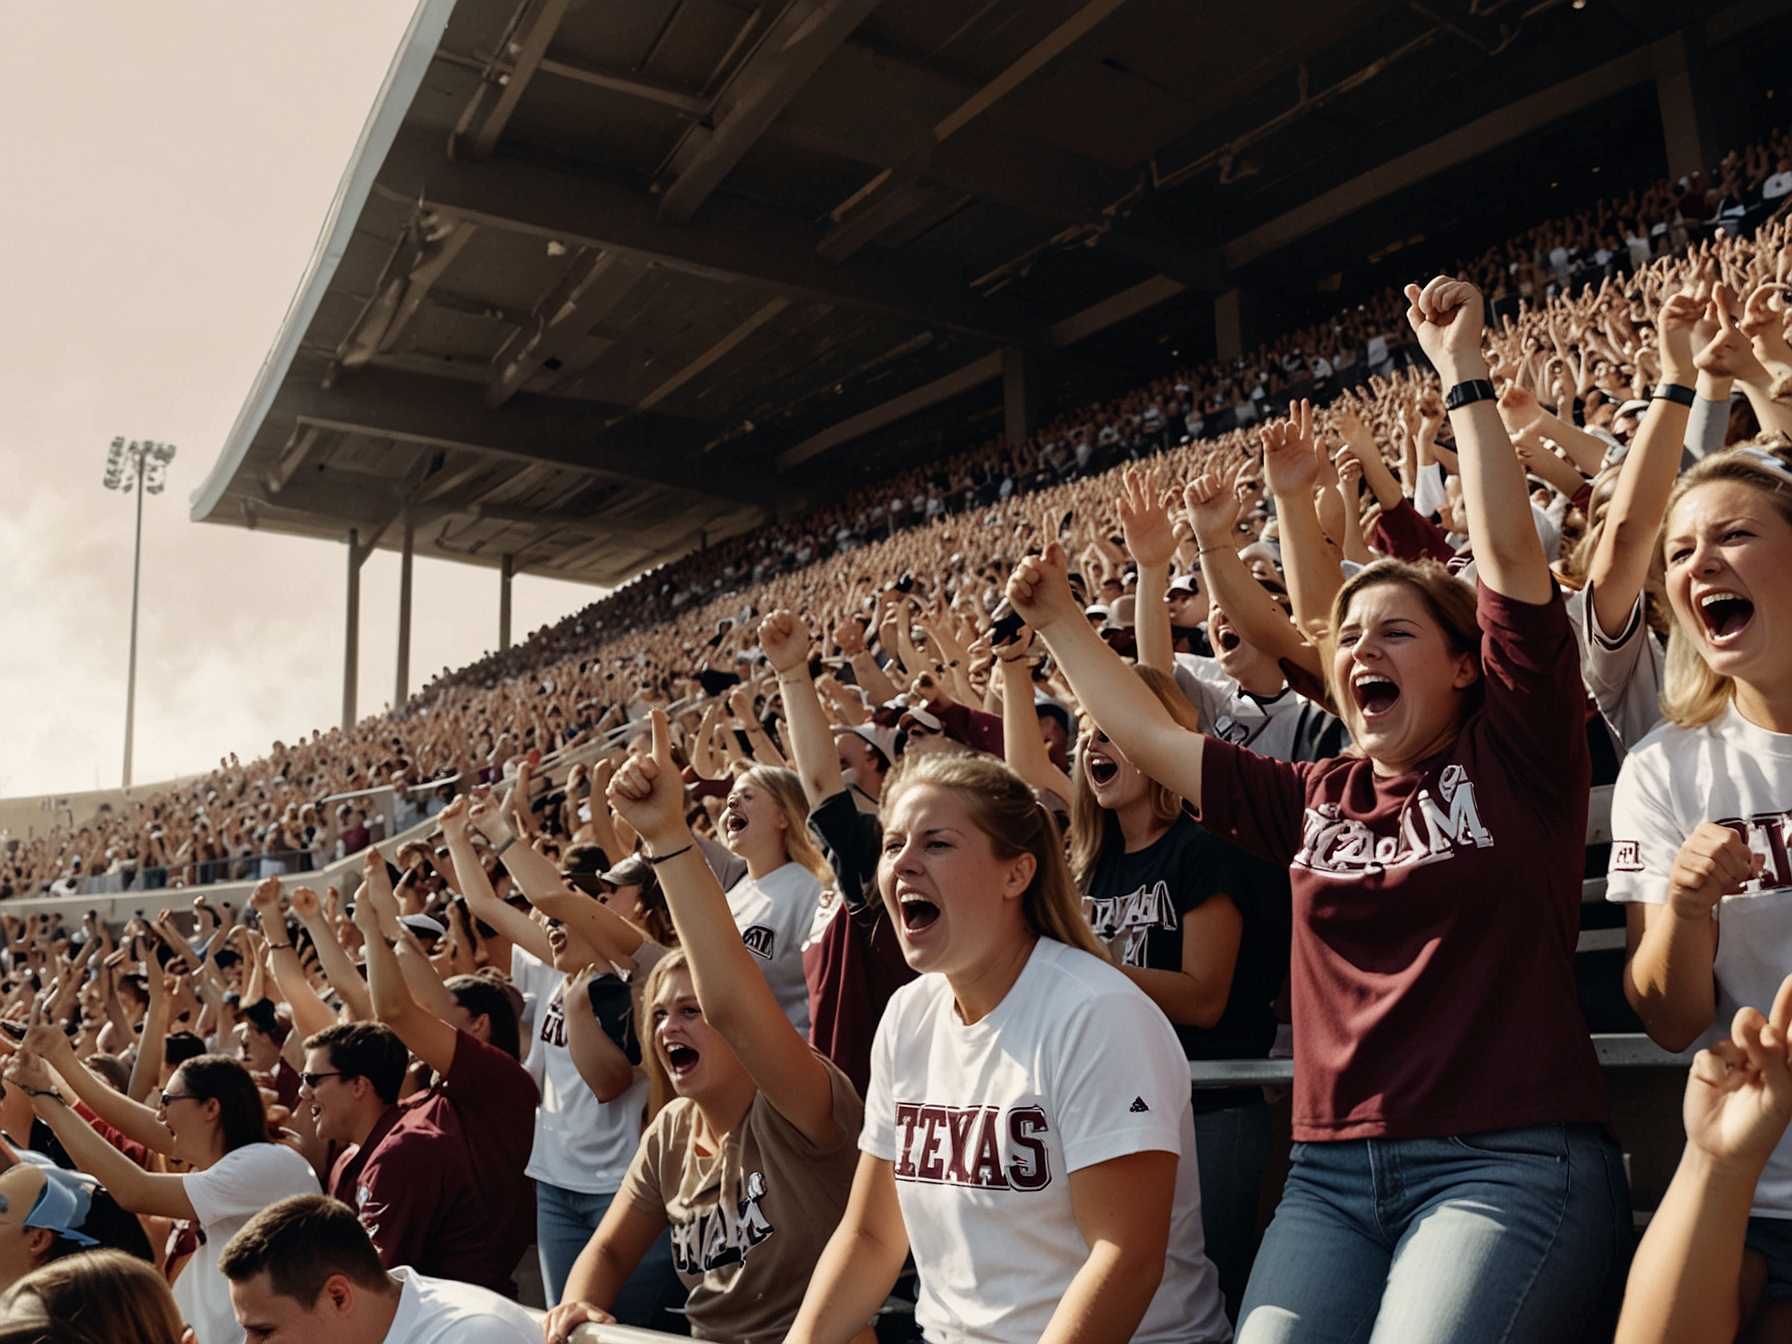 Texas A&M fans passionately cheer in the packed Omaha stadium, flaunting school colors, creating an electric atmosphere before the altercation with Florida’s dugout escalates.